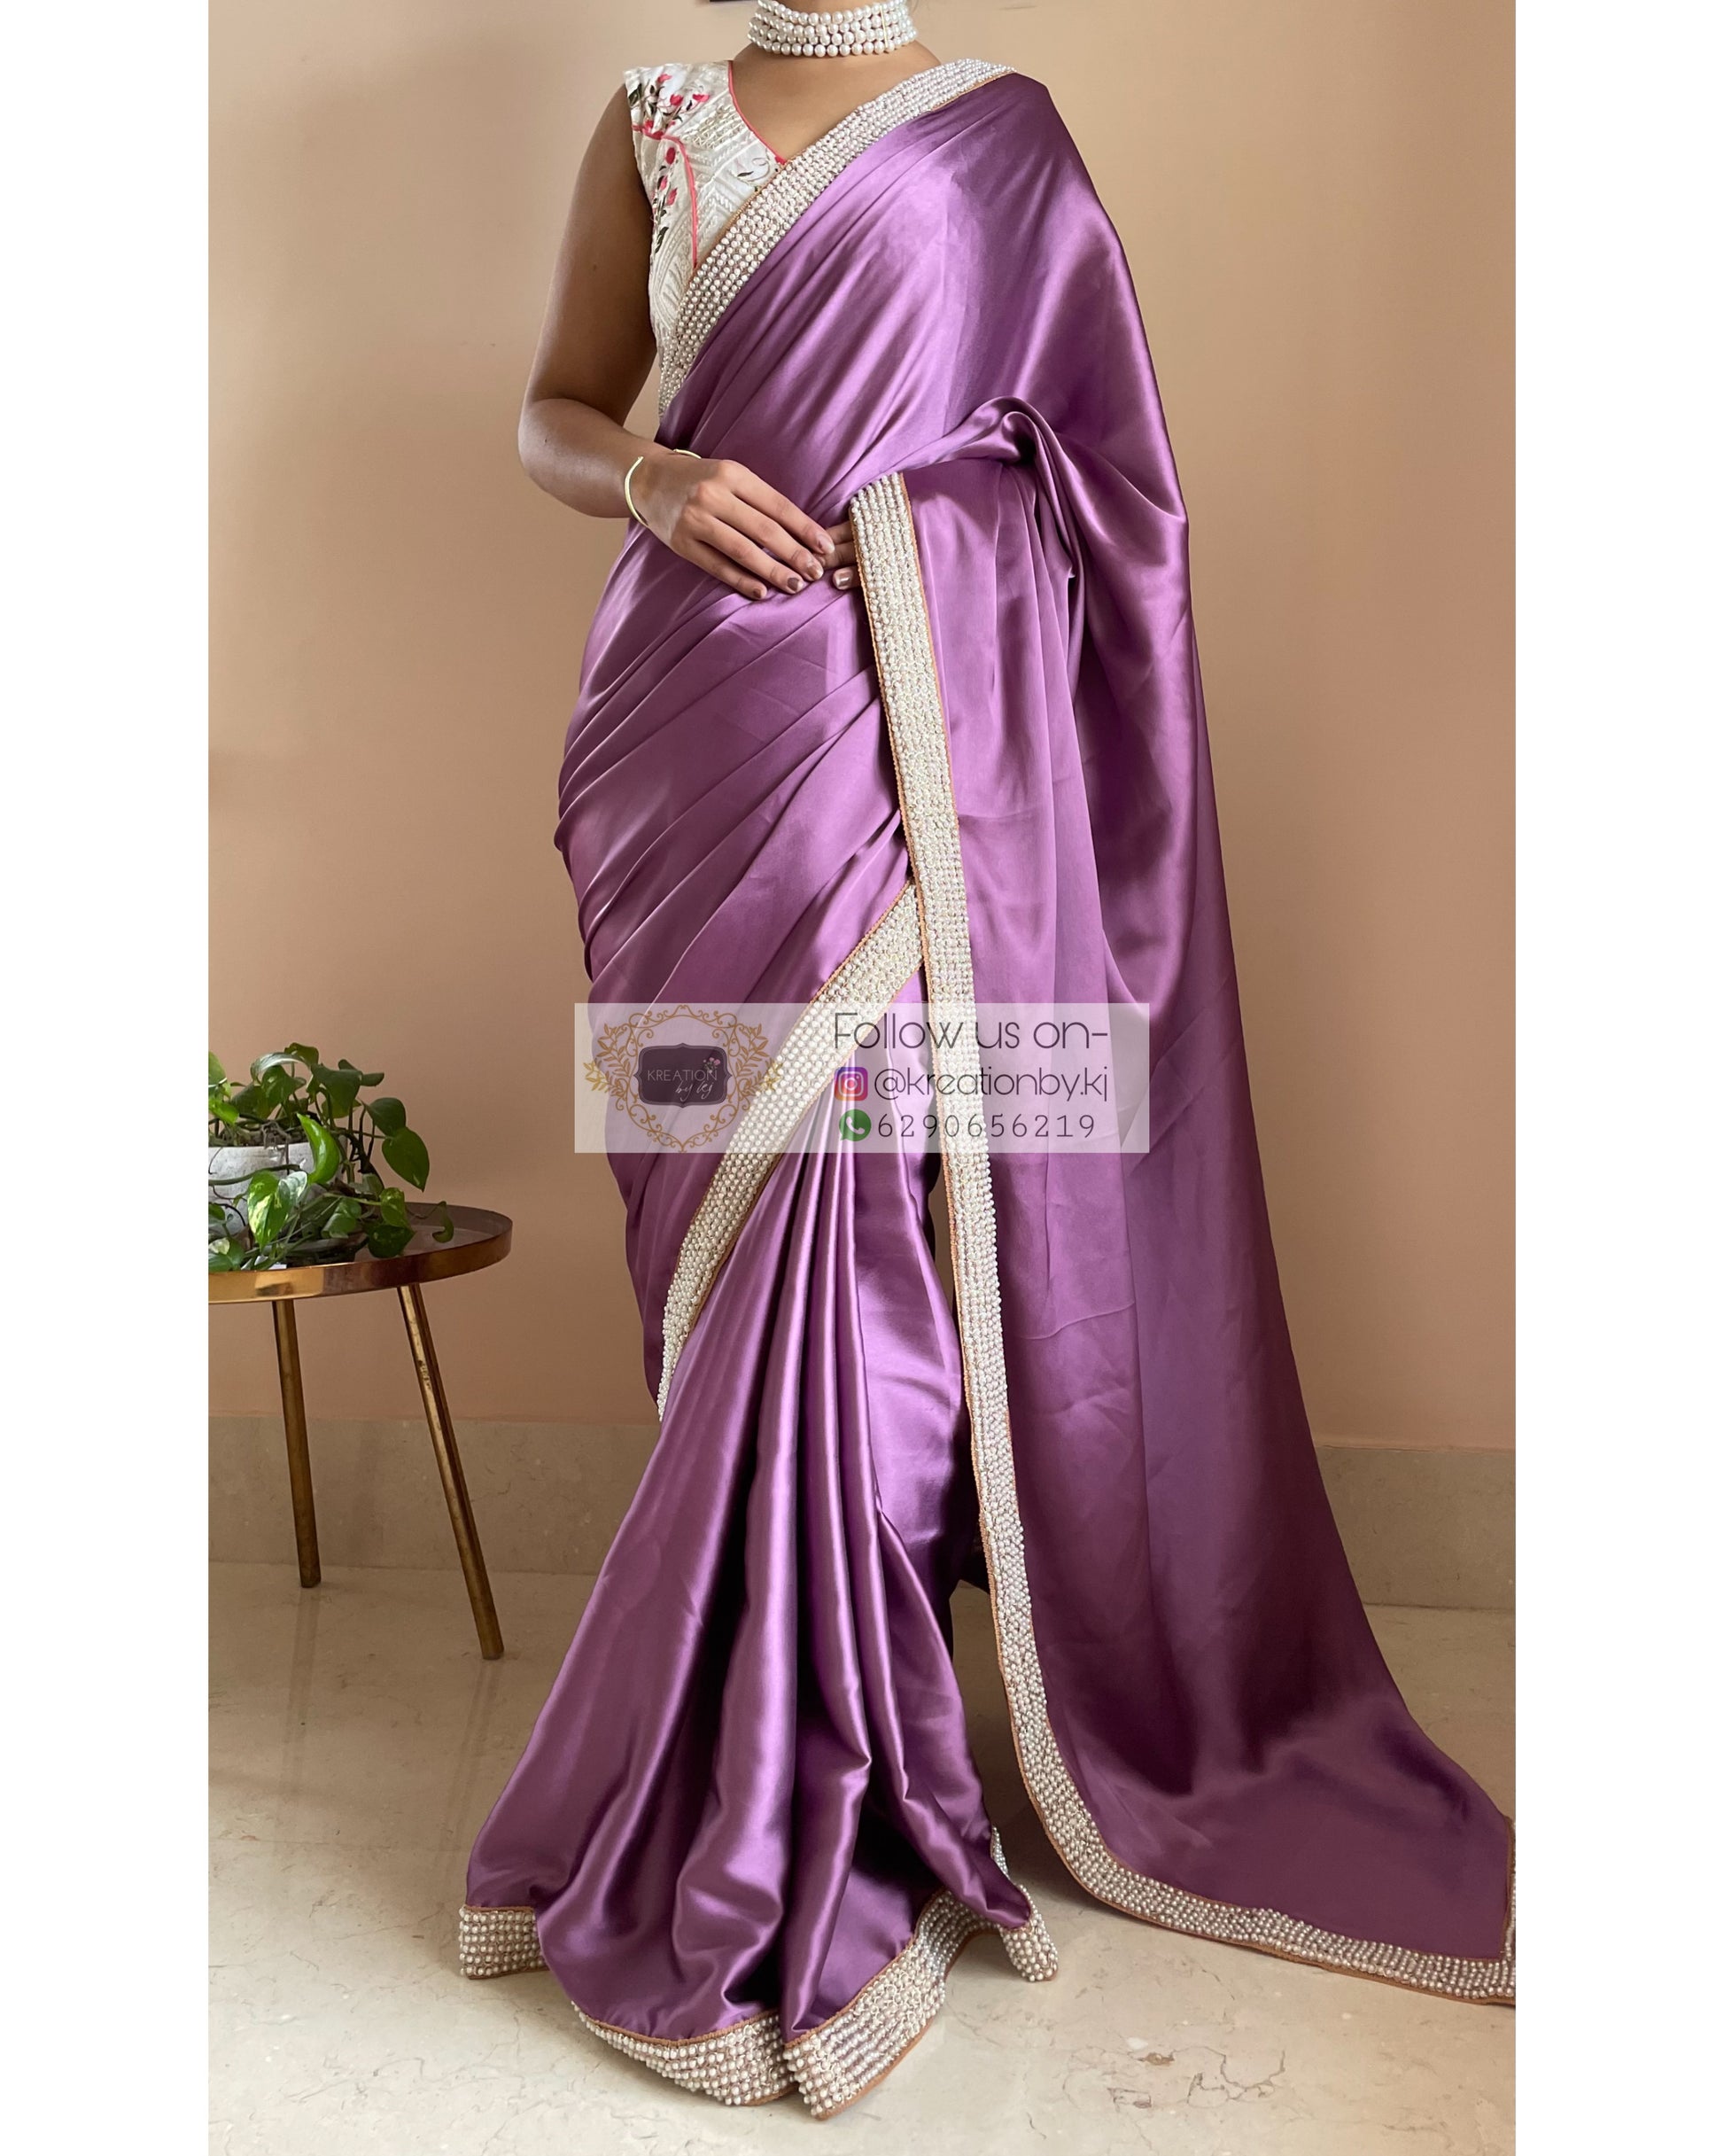 Heather Mother of Pearl Saree - kreationbykj